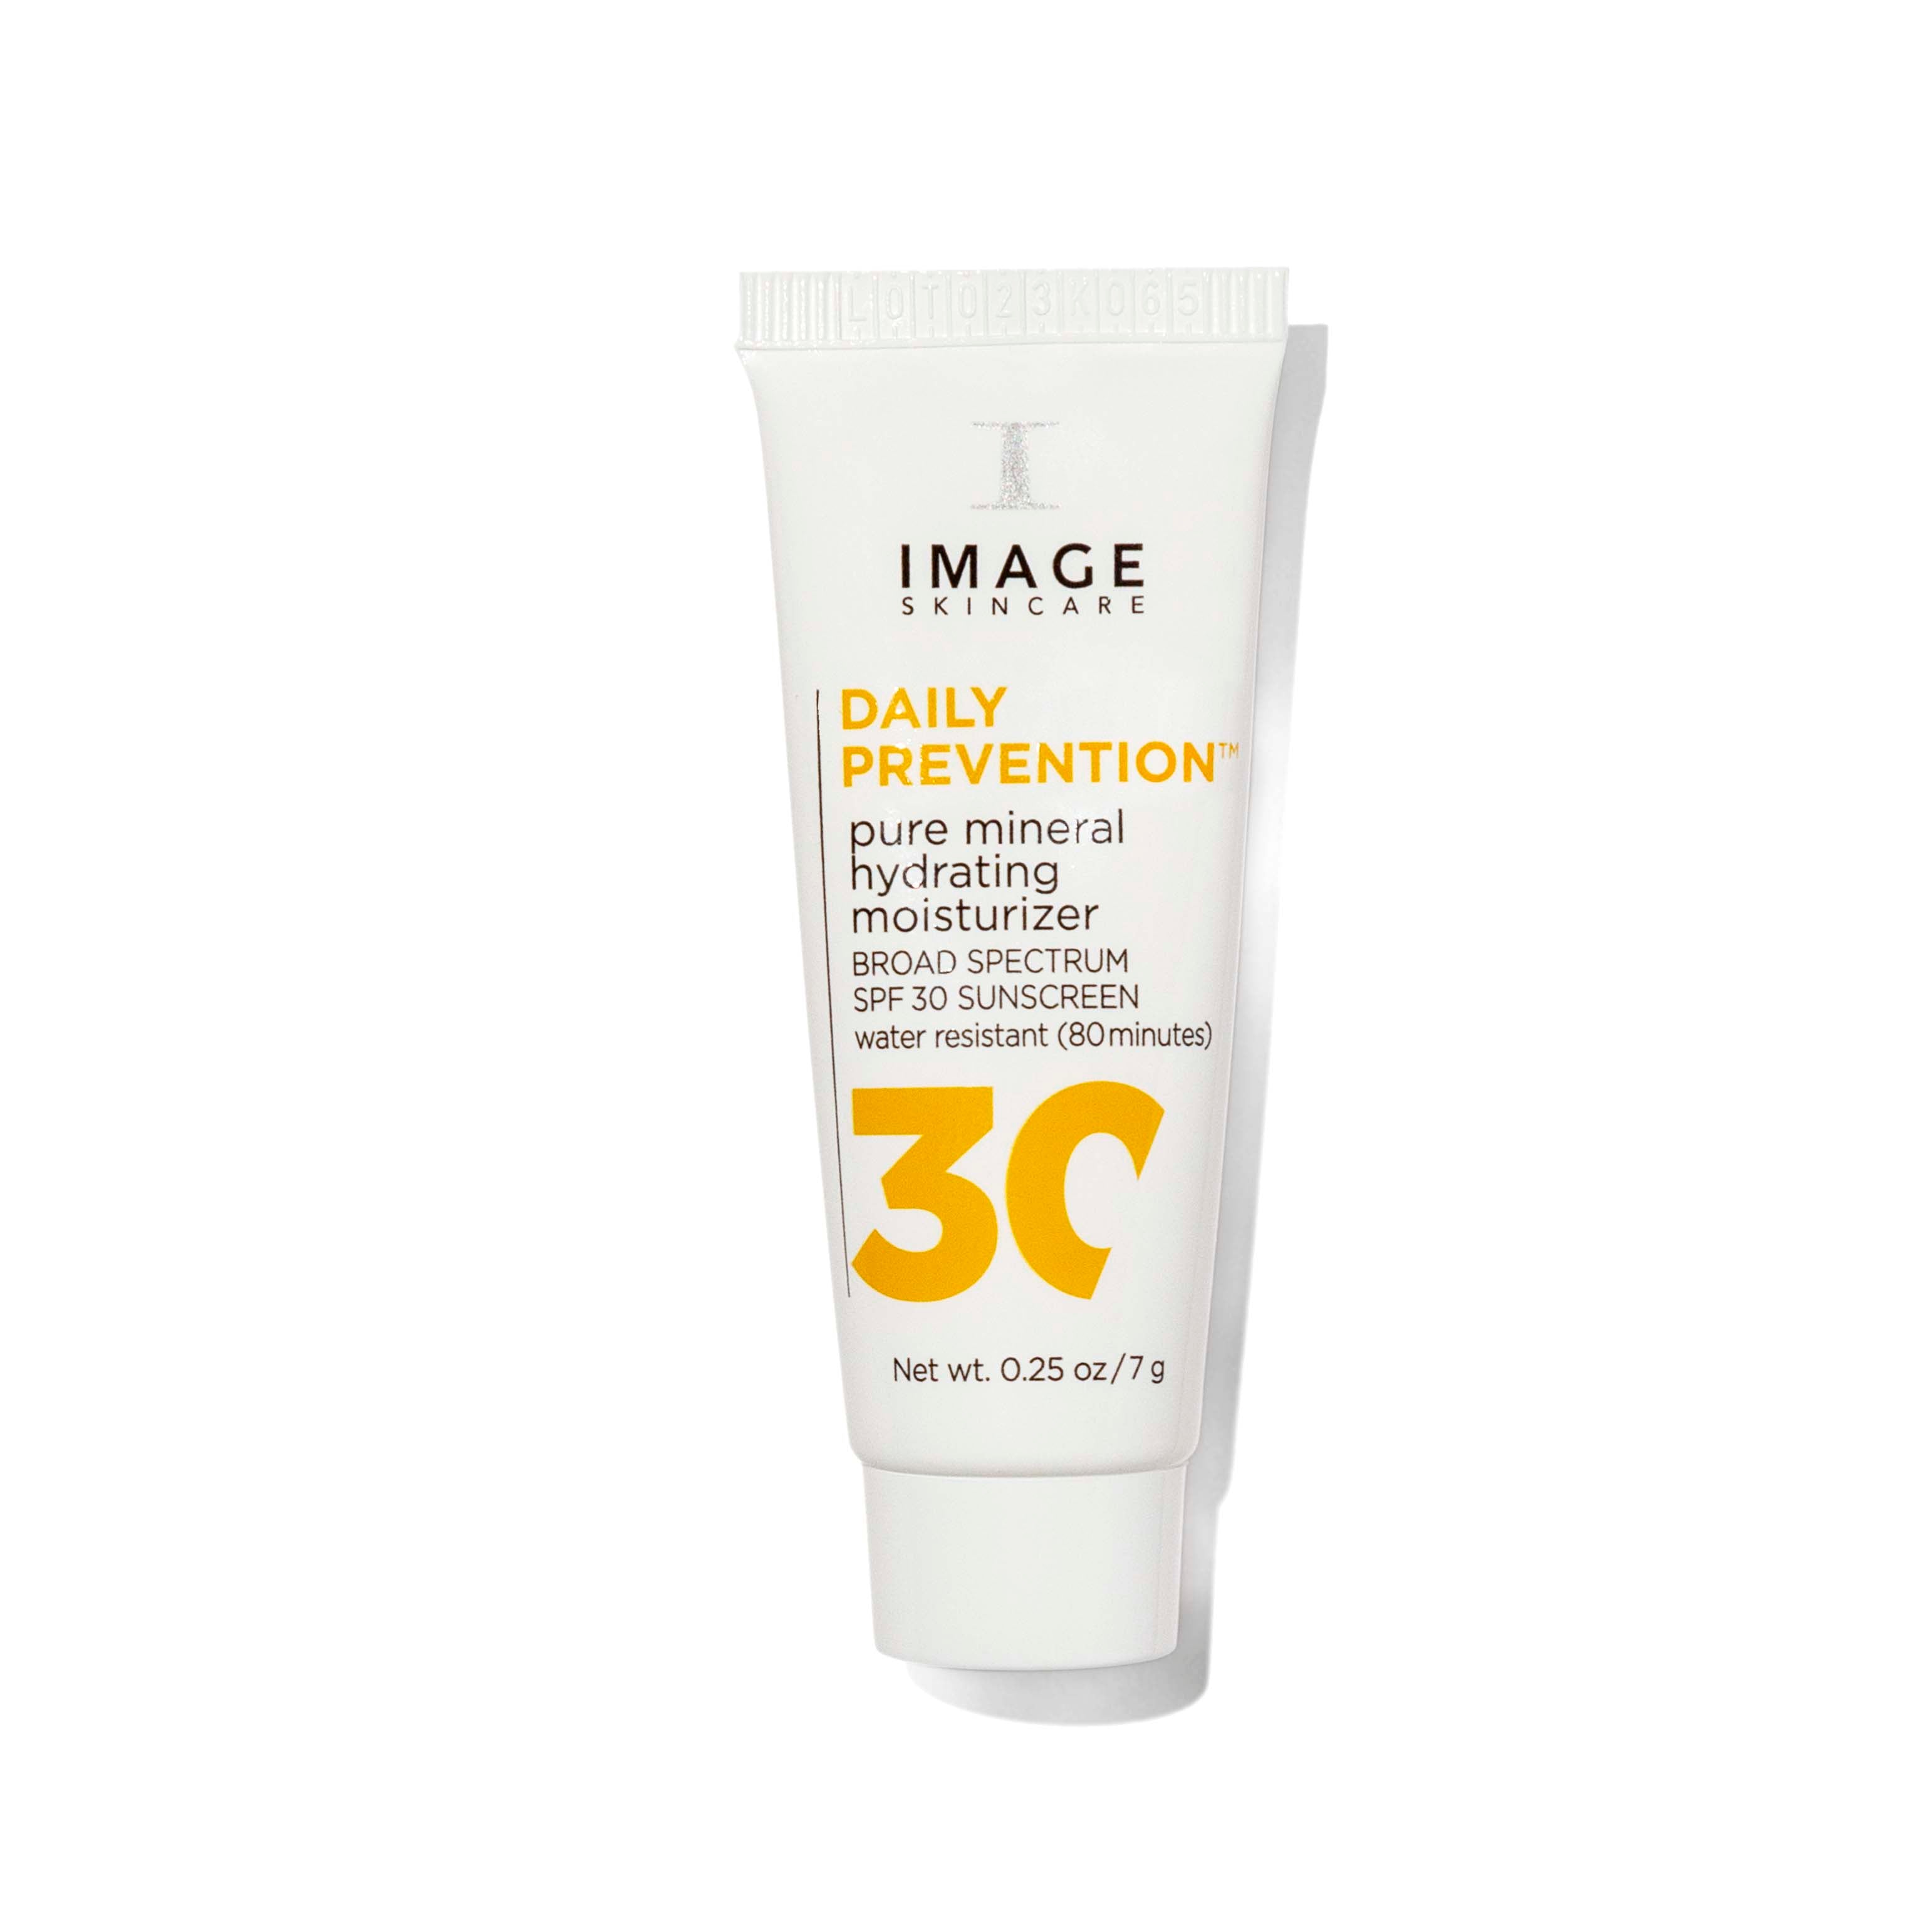 DAILY PREVENTION pure mineral hydrating moisturizer SPF 30 sample